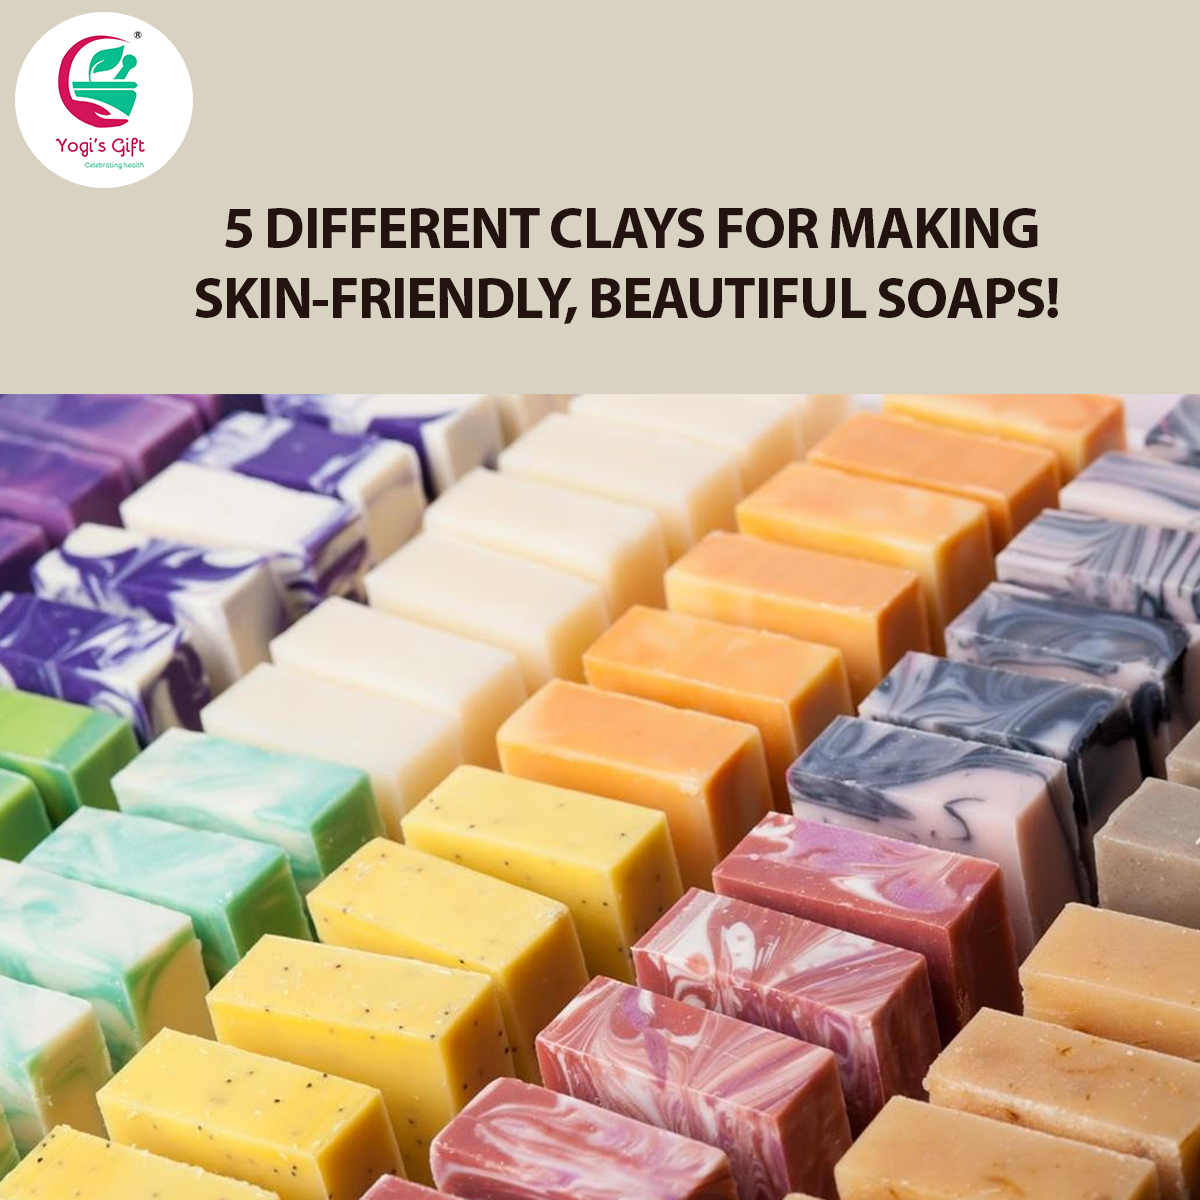 Pack of 5 Clays For Mask & Soap Making | Rose Clay, French Green Clay, Kaolin Clay, Moroccan Red Clay and Bentonite Clay | 8oz Each | Yogi’s Gift®